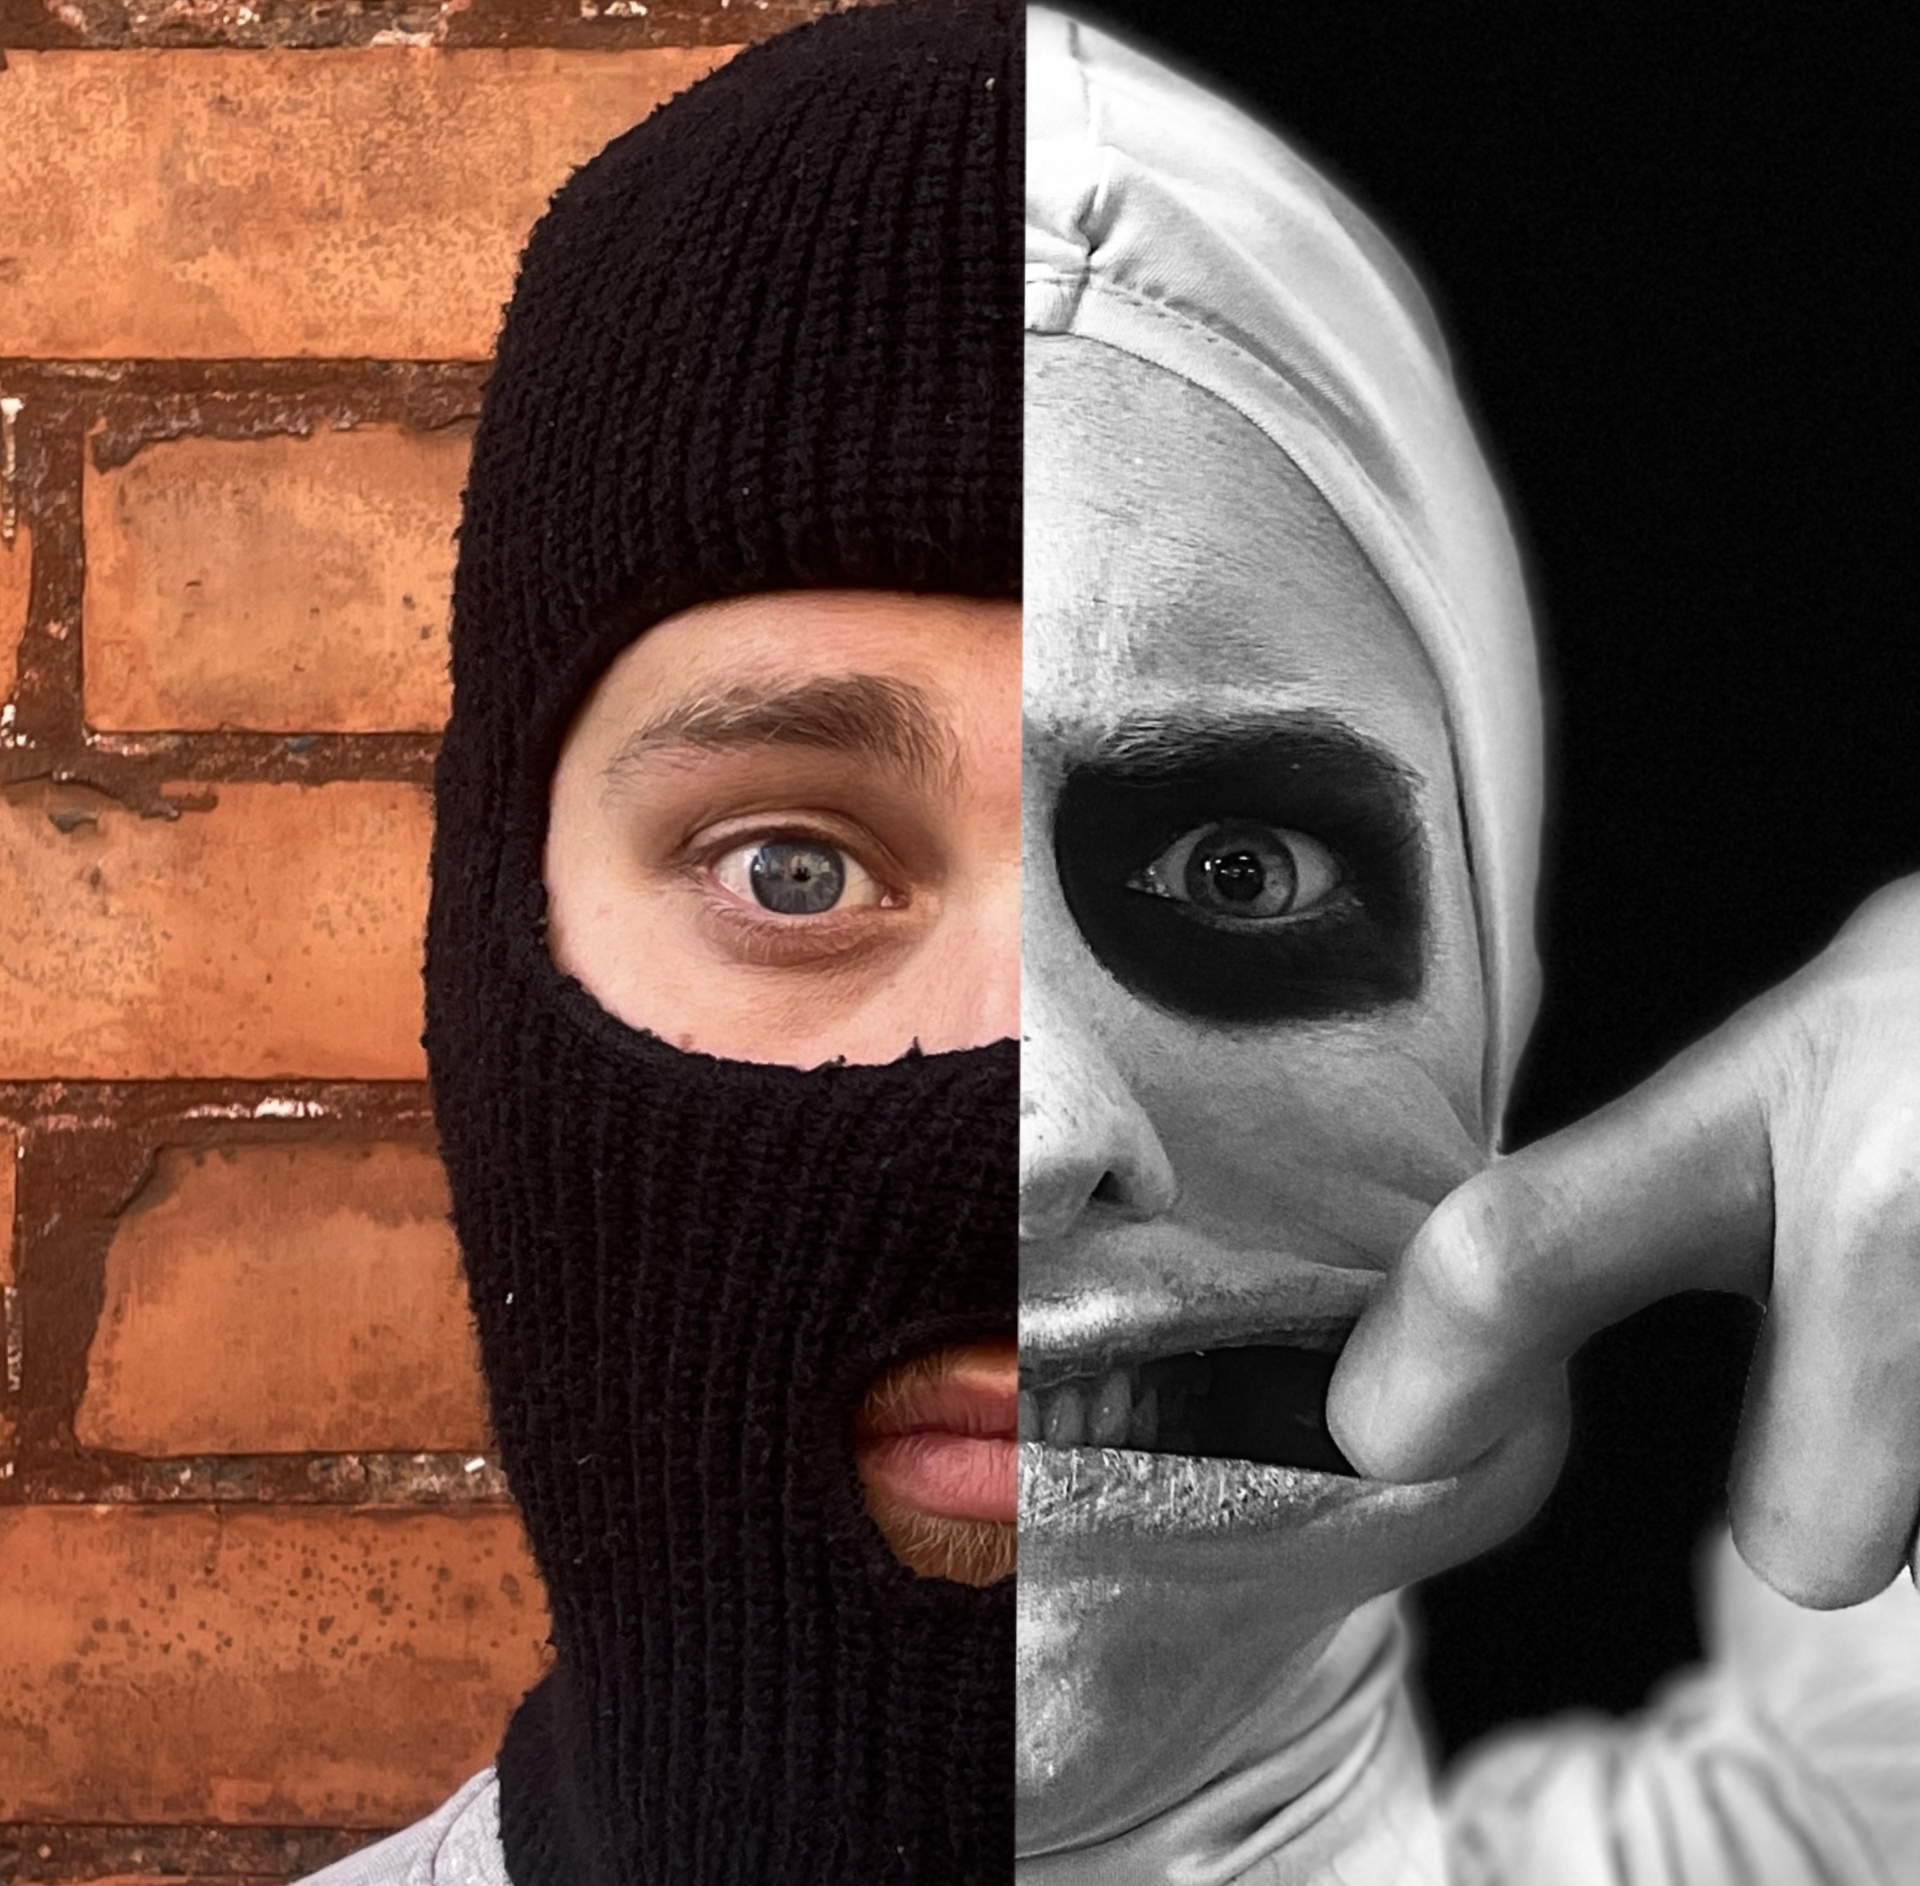 Image shows two photographs of faces on a brick wall.